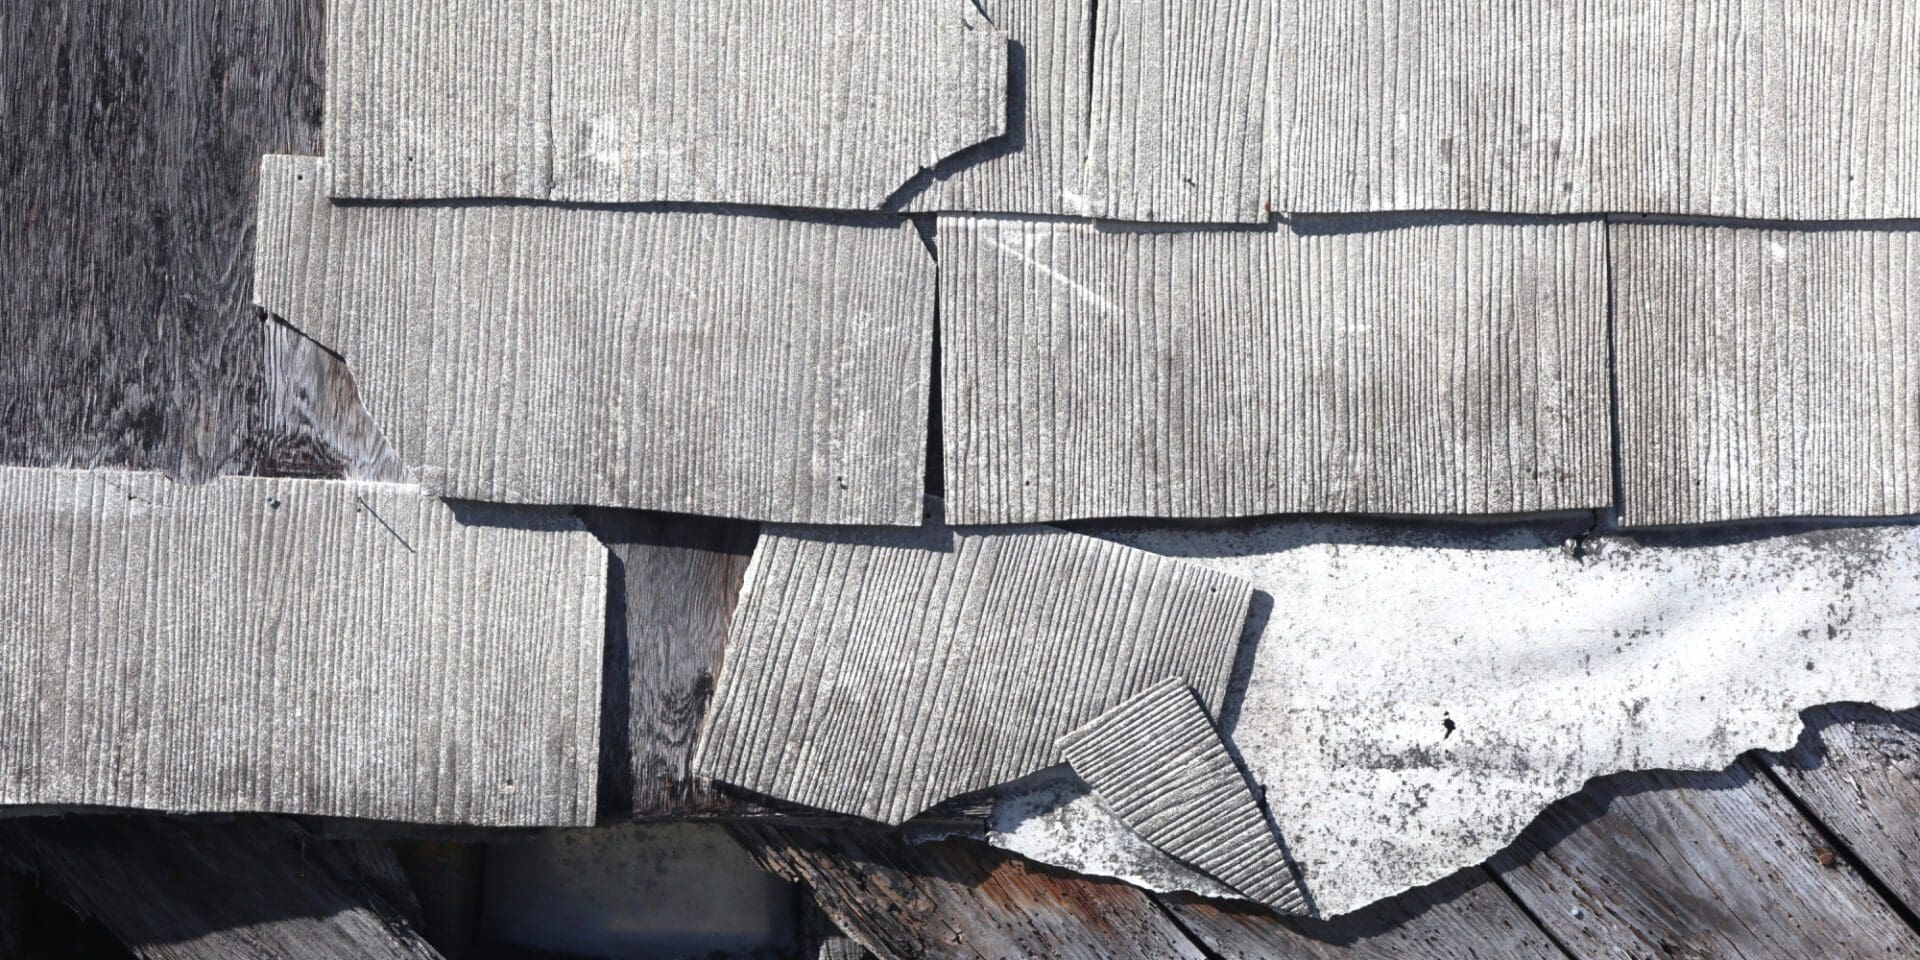 Types of Shingle Roofing Problems